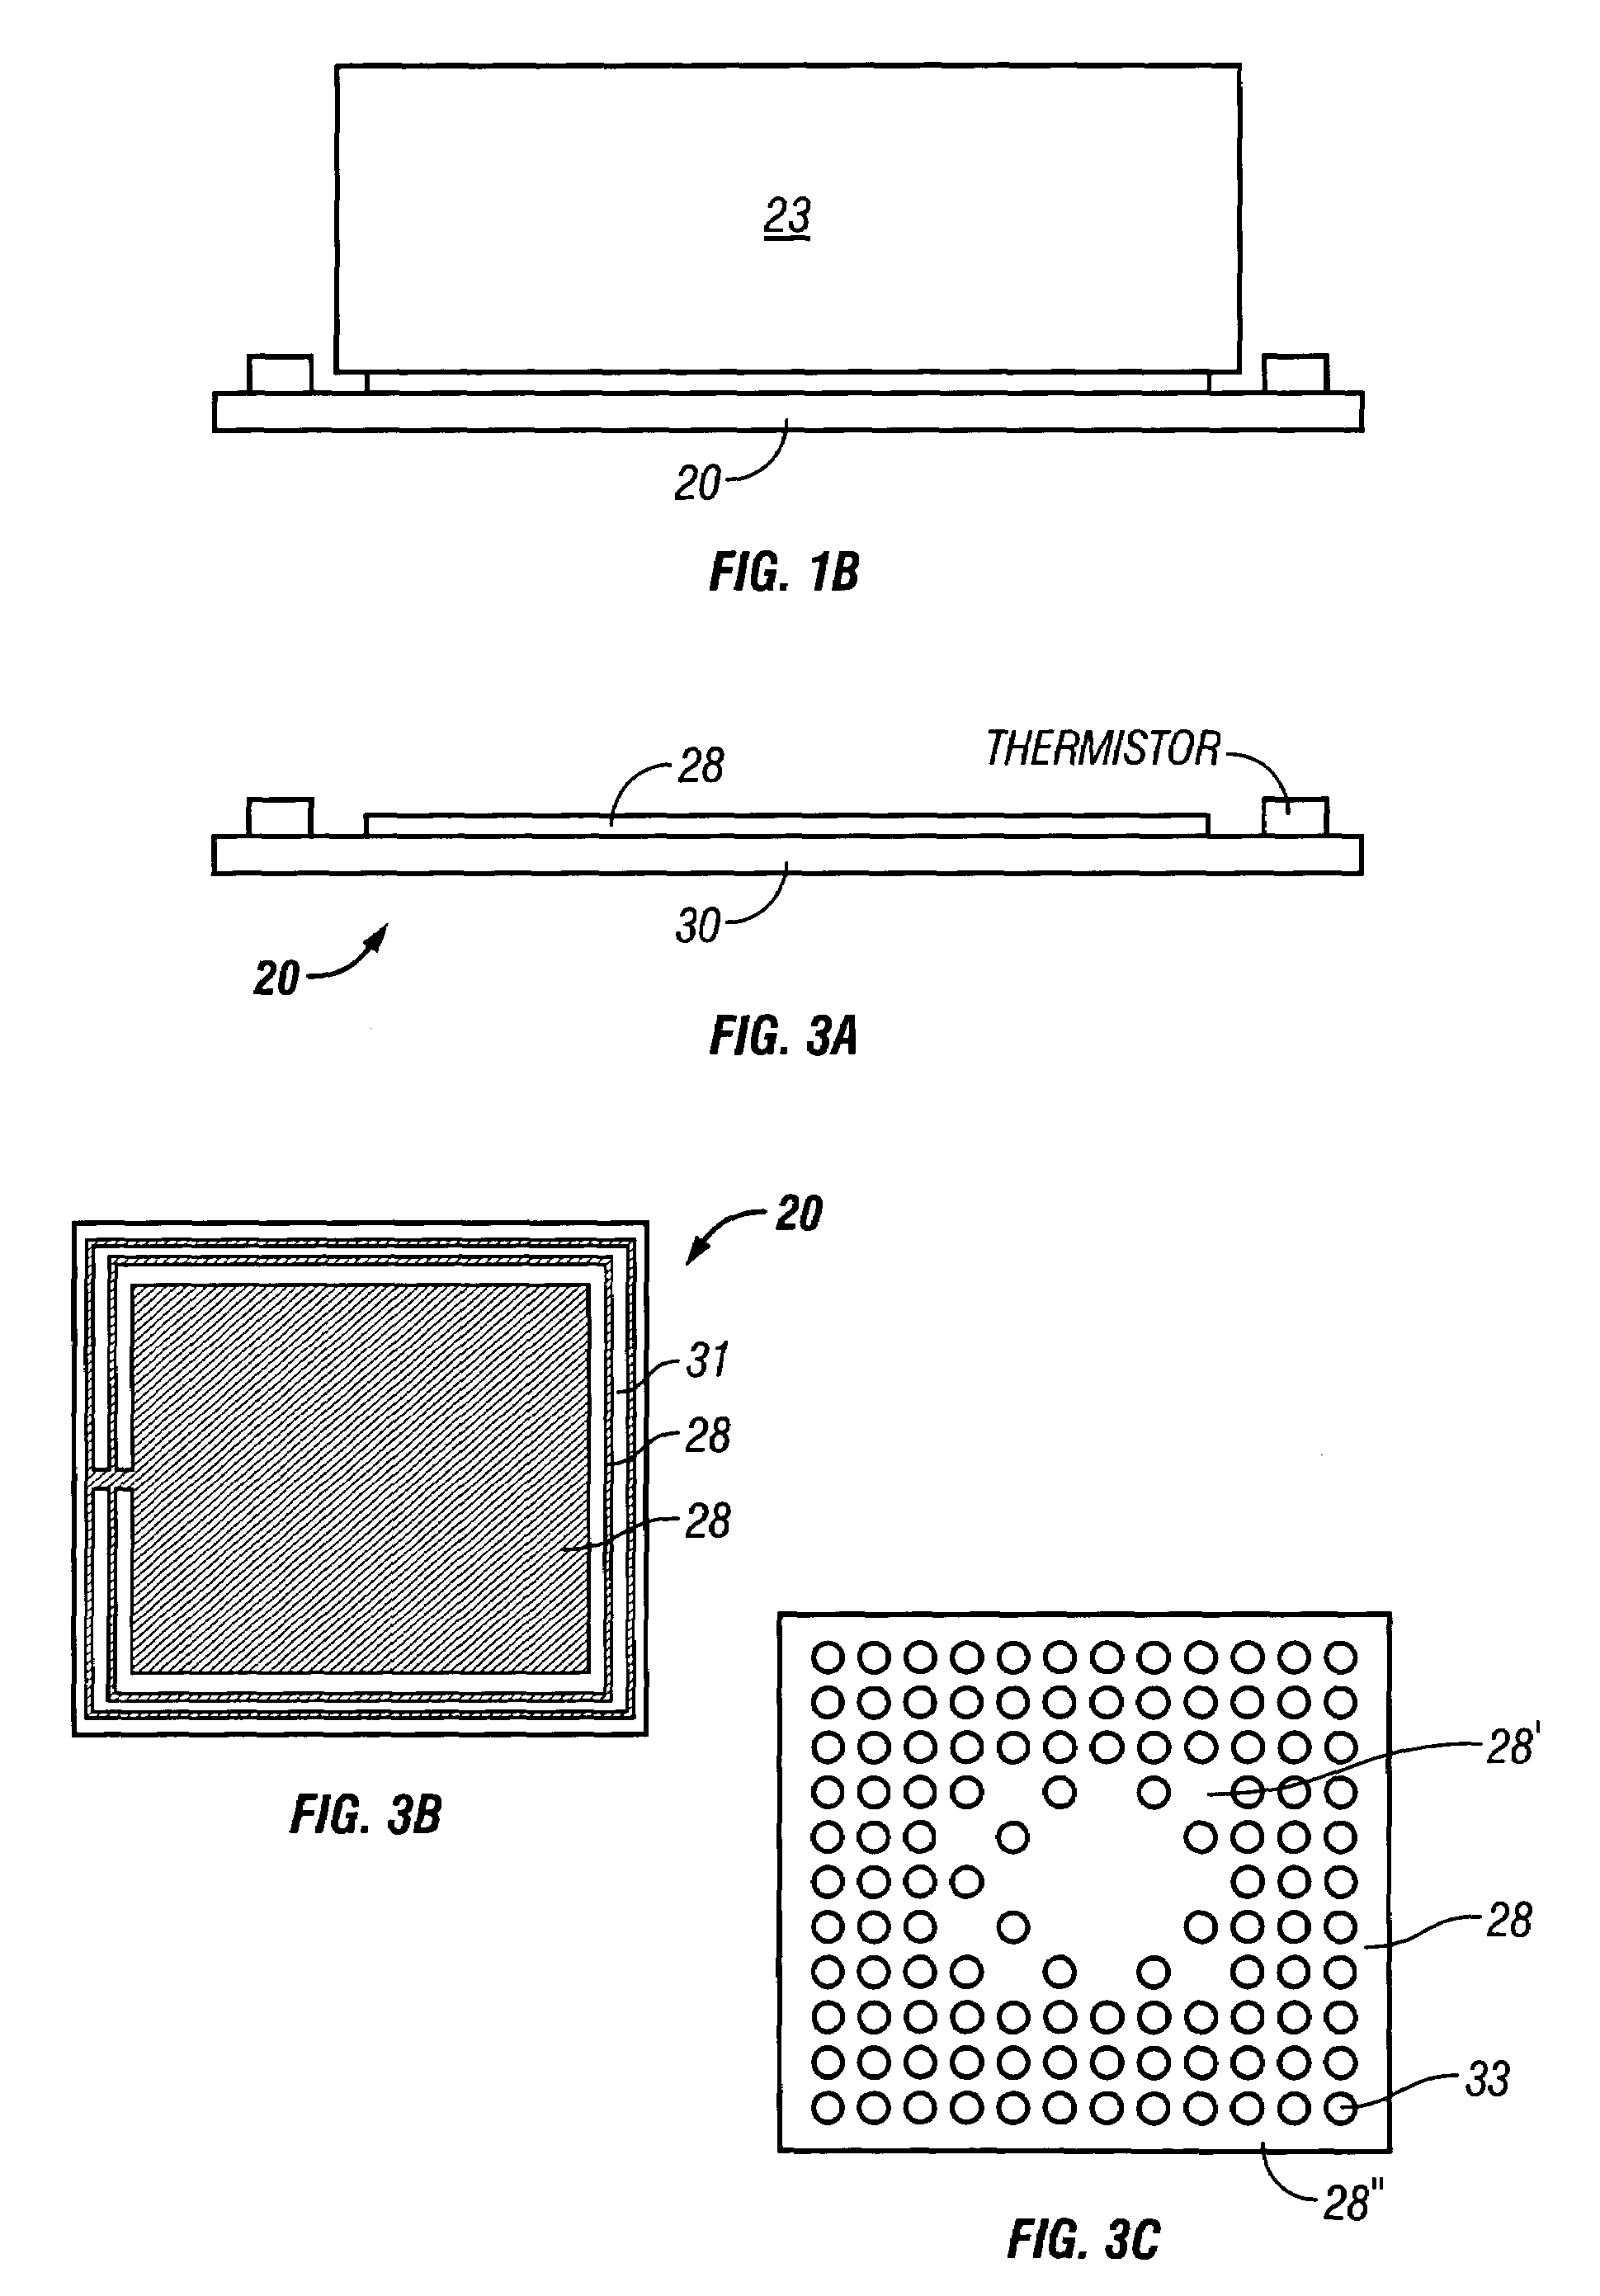 Methods for creating tissue effect utilizing electromagnetic energy and a reverse thermal gradient